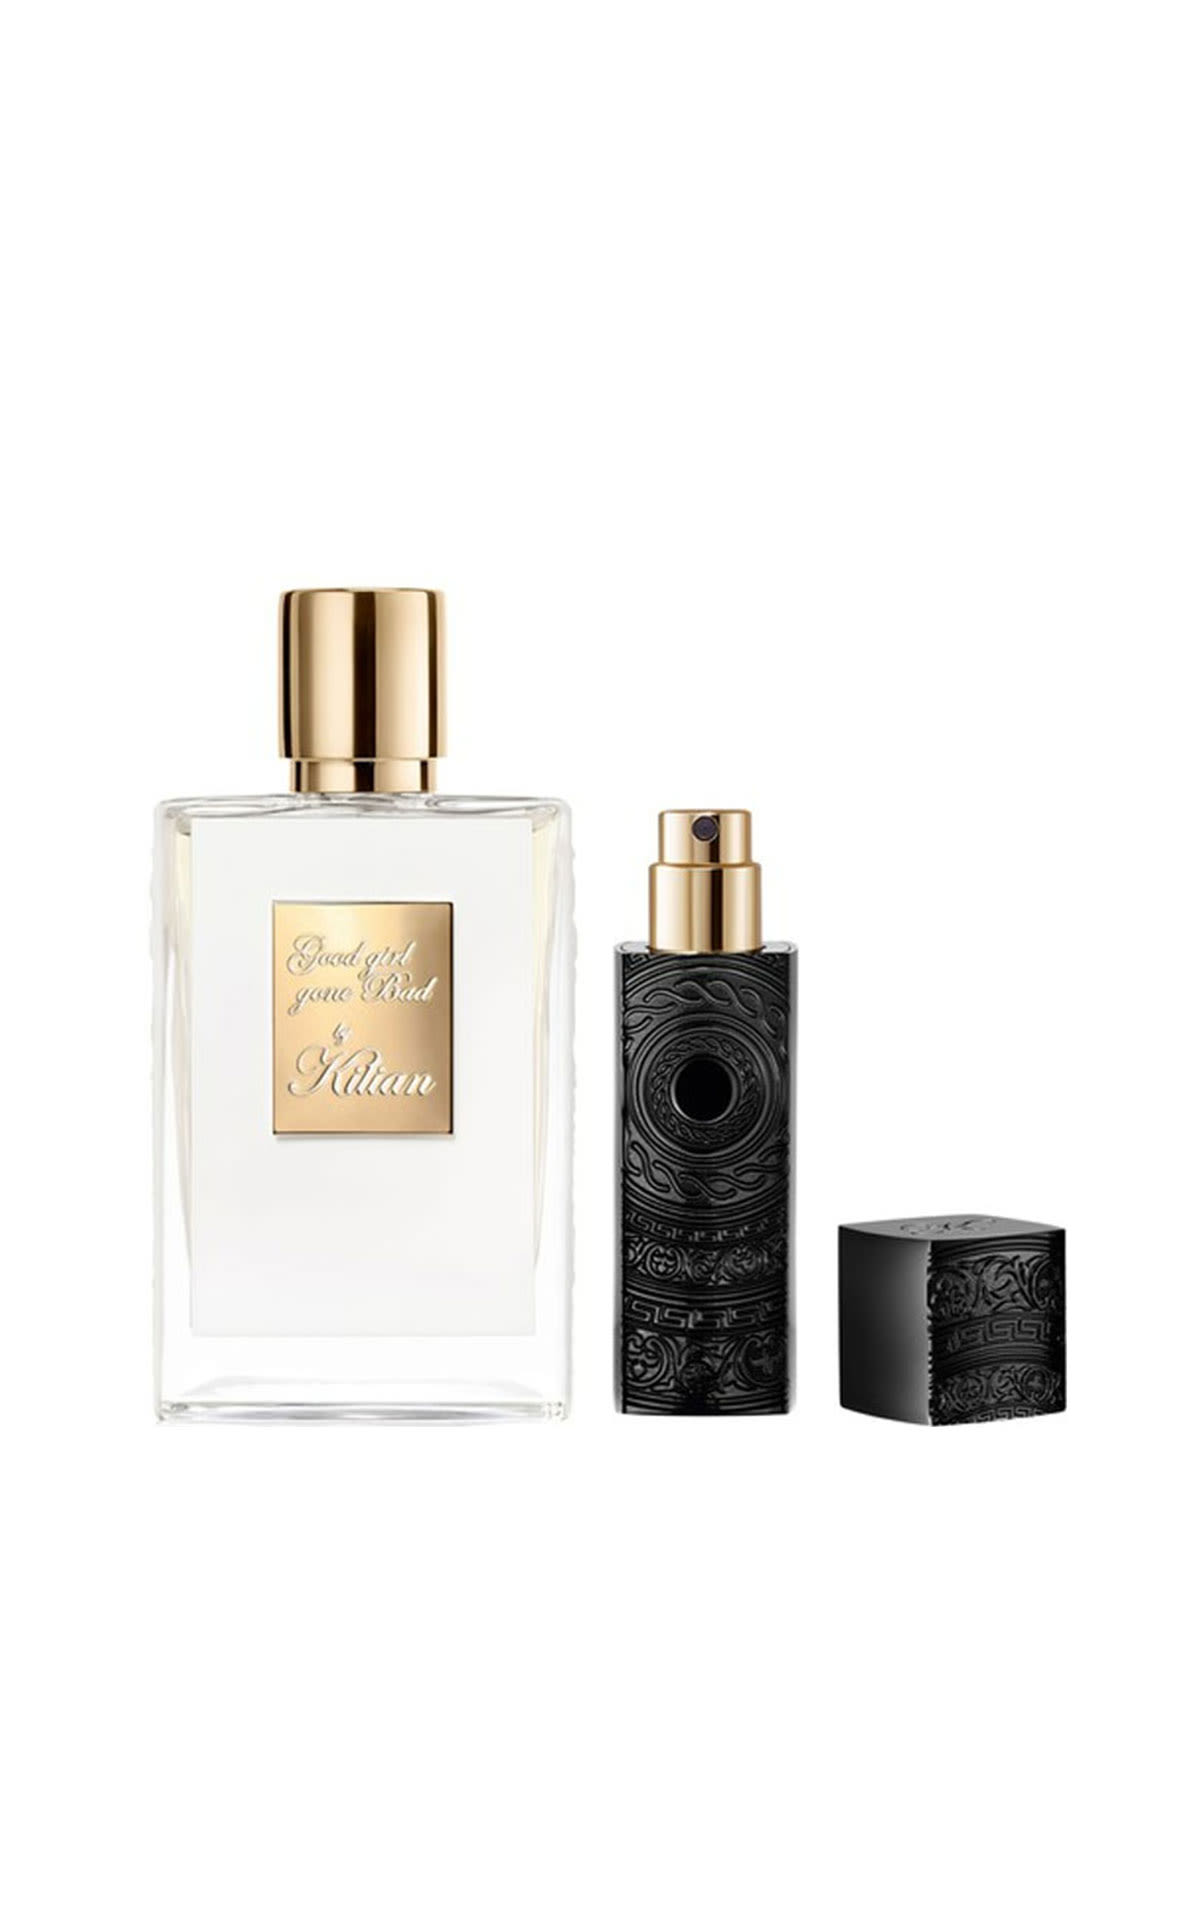 The Cosmetics Company Store Kilian Paris Good girl gone bad icon set from Bicester Village